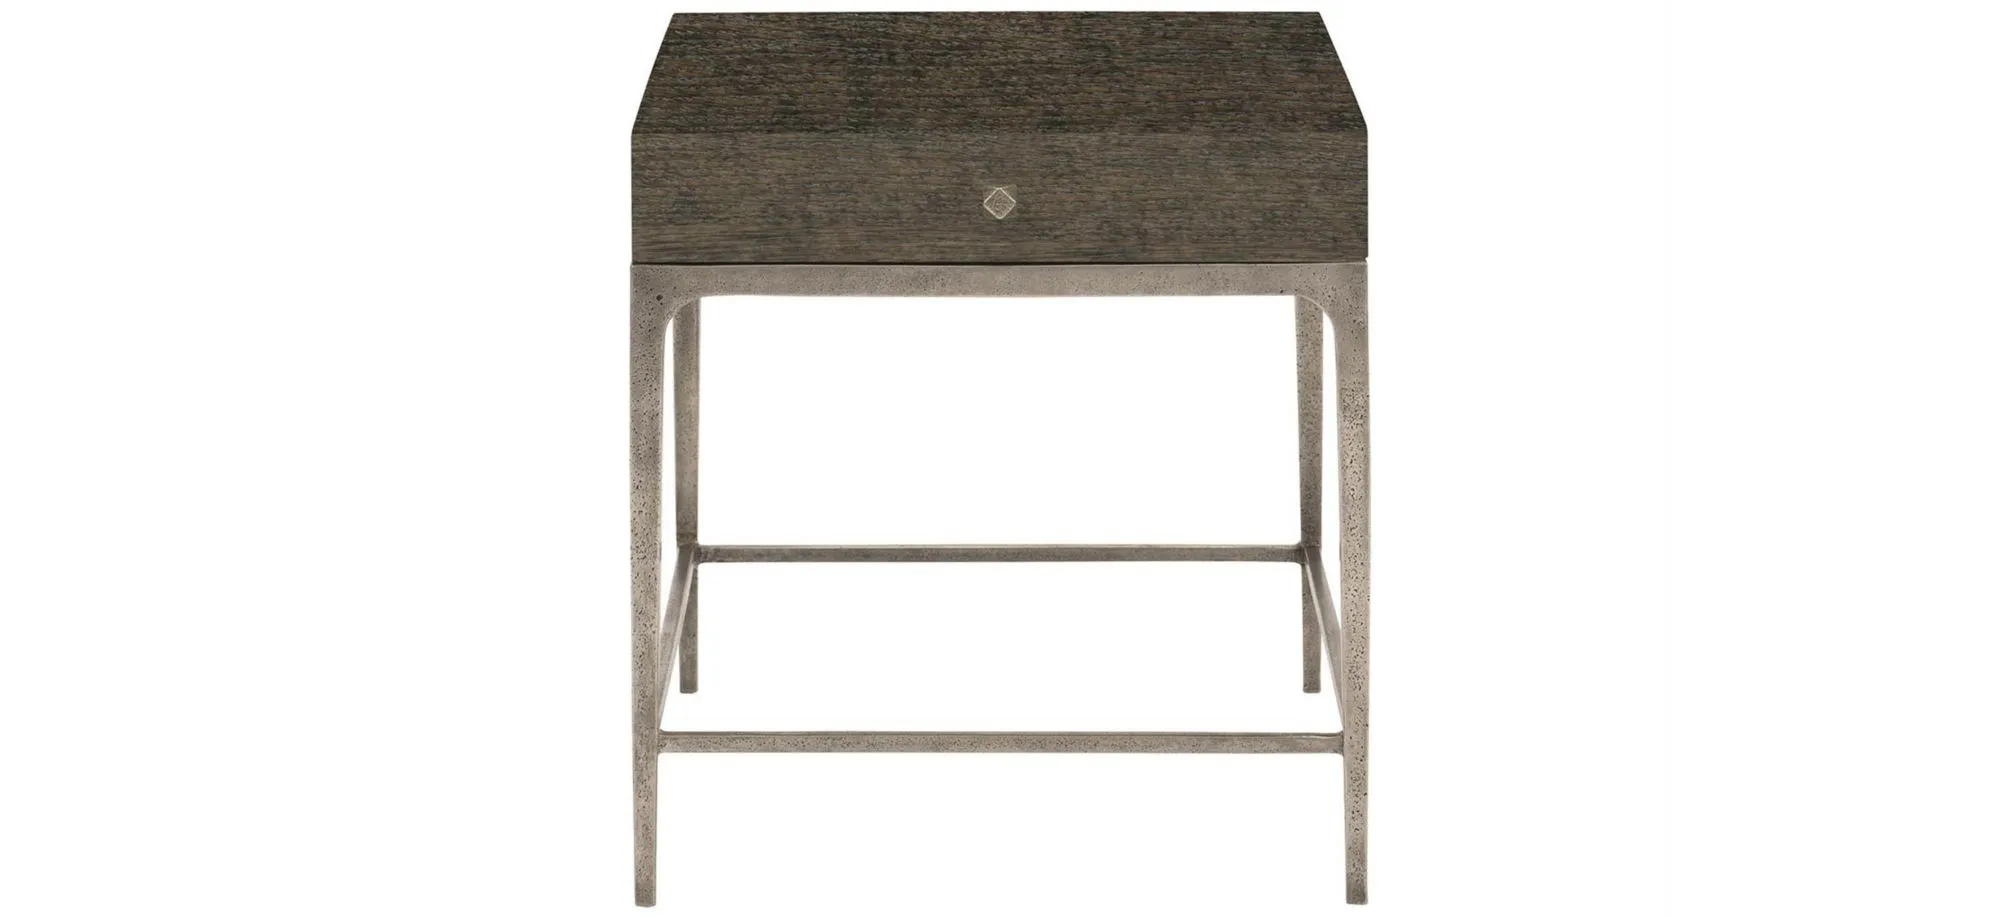 Linea Side Table in Cerused Charcoal by Bernhardt